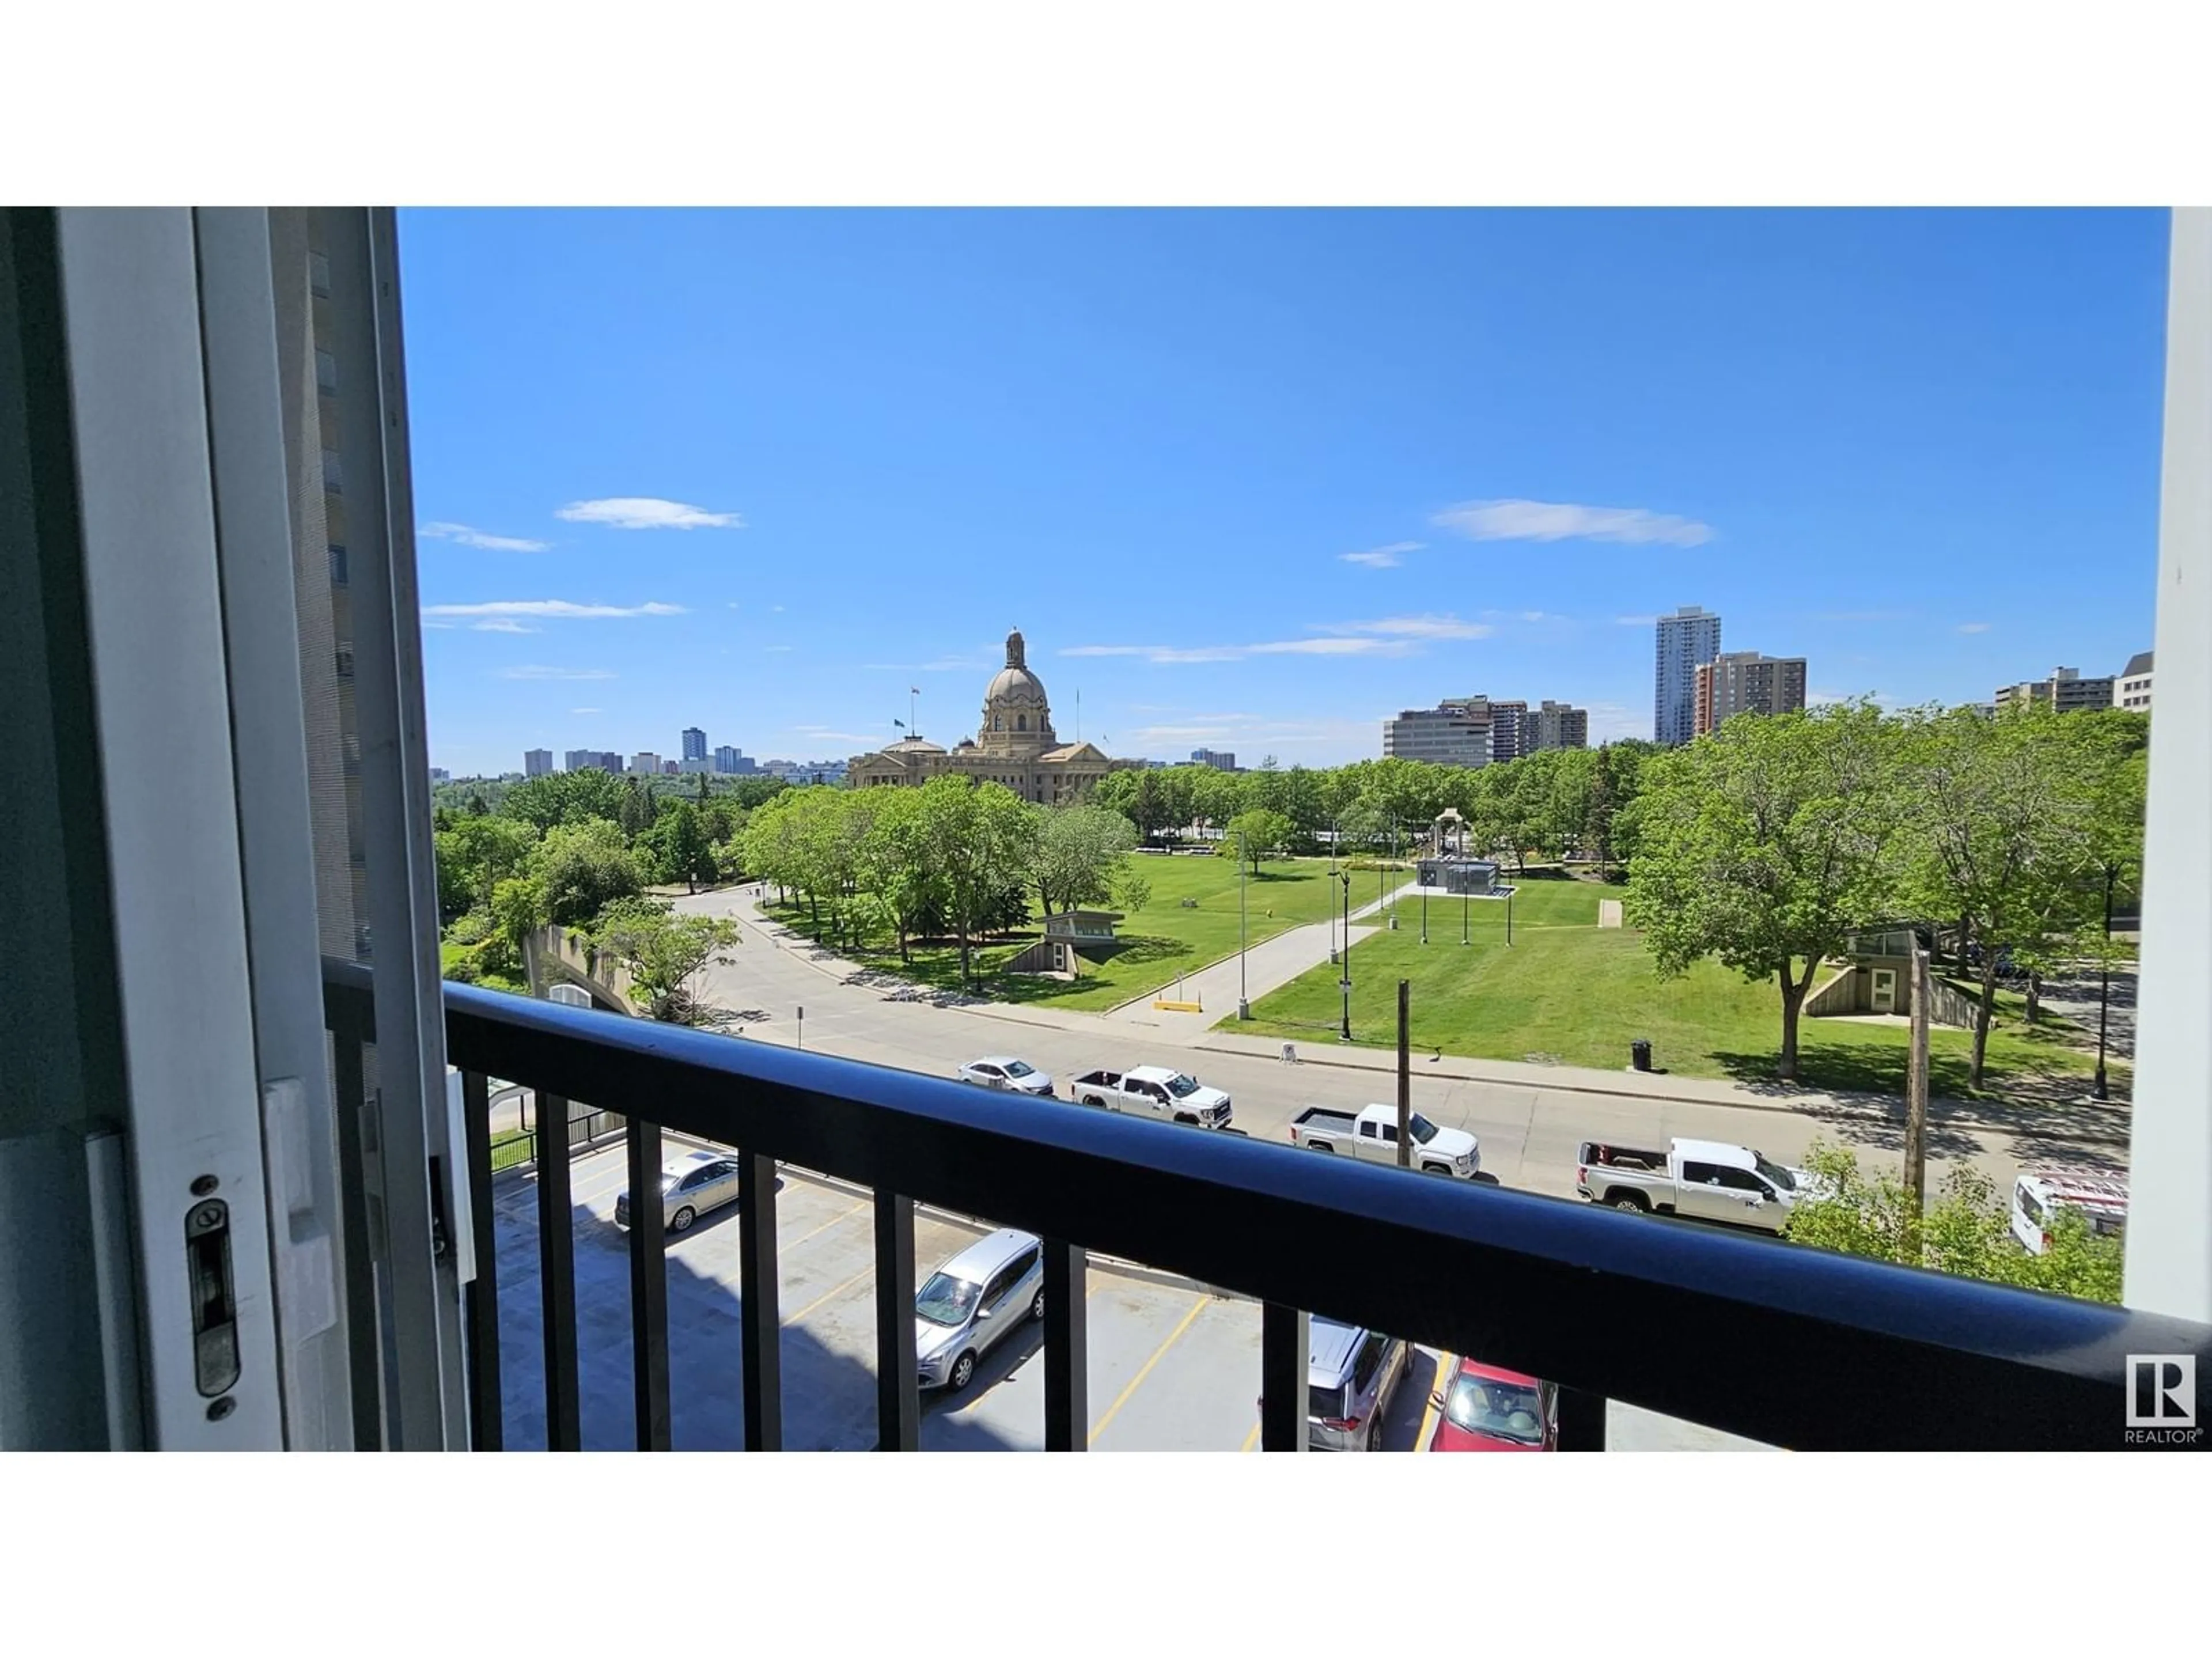 Balcony in the apartment for #501 9730 106 ST NW, Edmonton Alberta T5K1B7